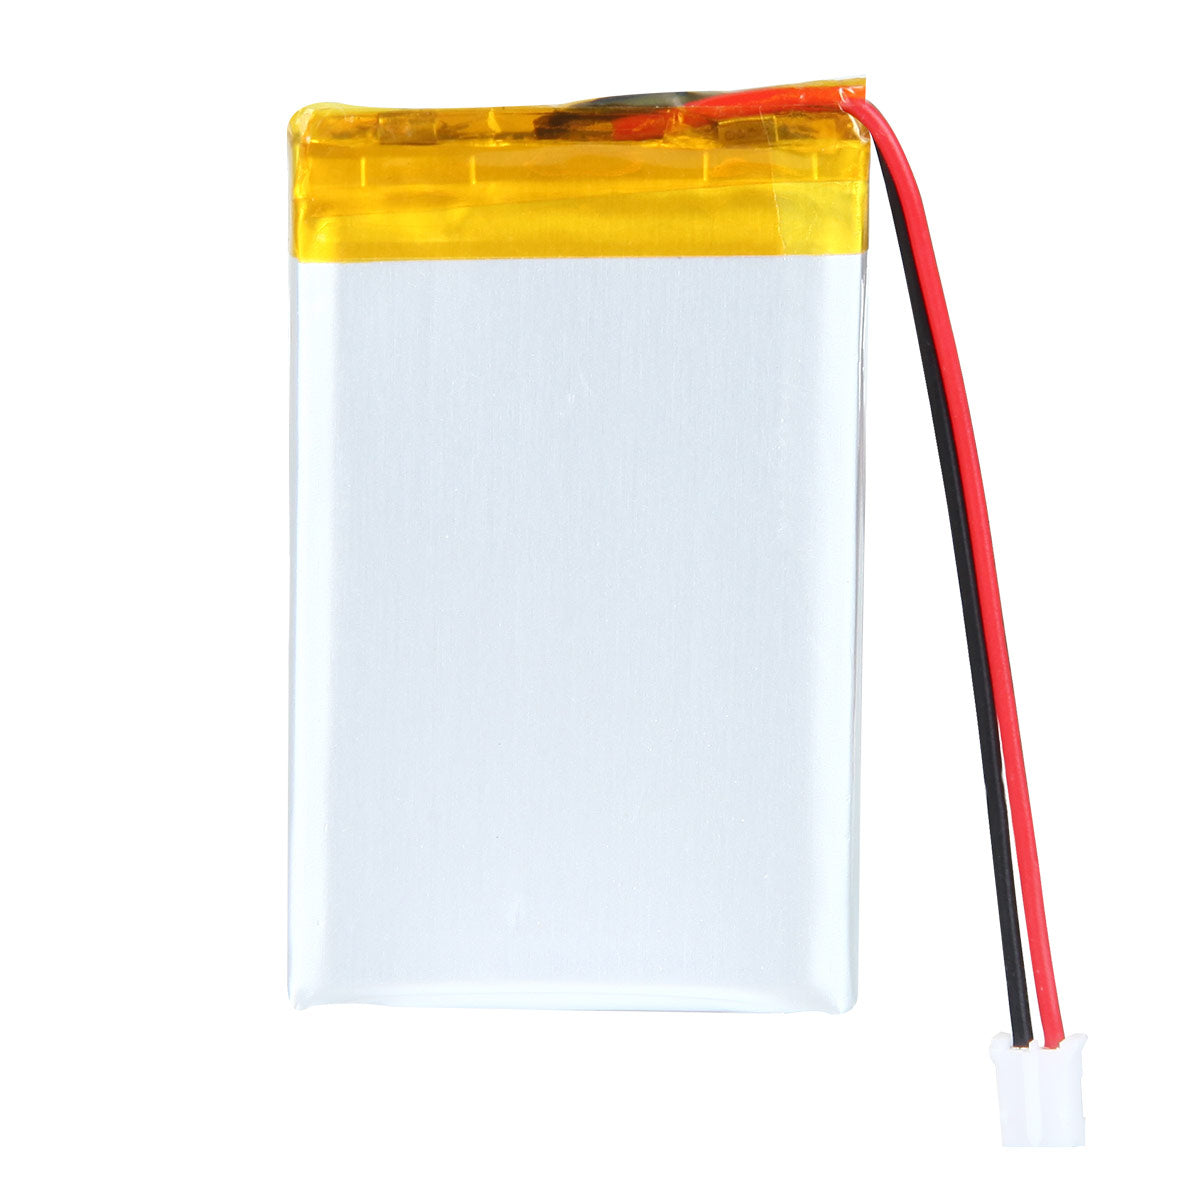 YDL 3.7V 500mAh 502248 Lipo Battery Rechargeable Lithium Polymer ion  Battery Pack with PH2.0mm JST Connector